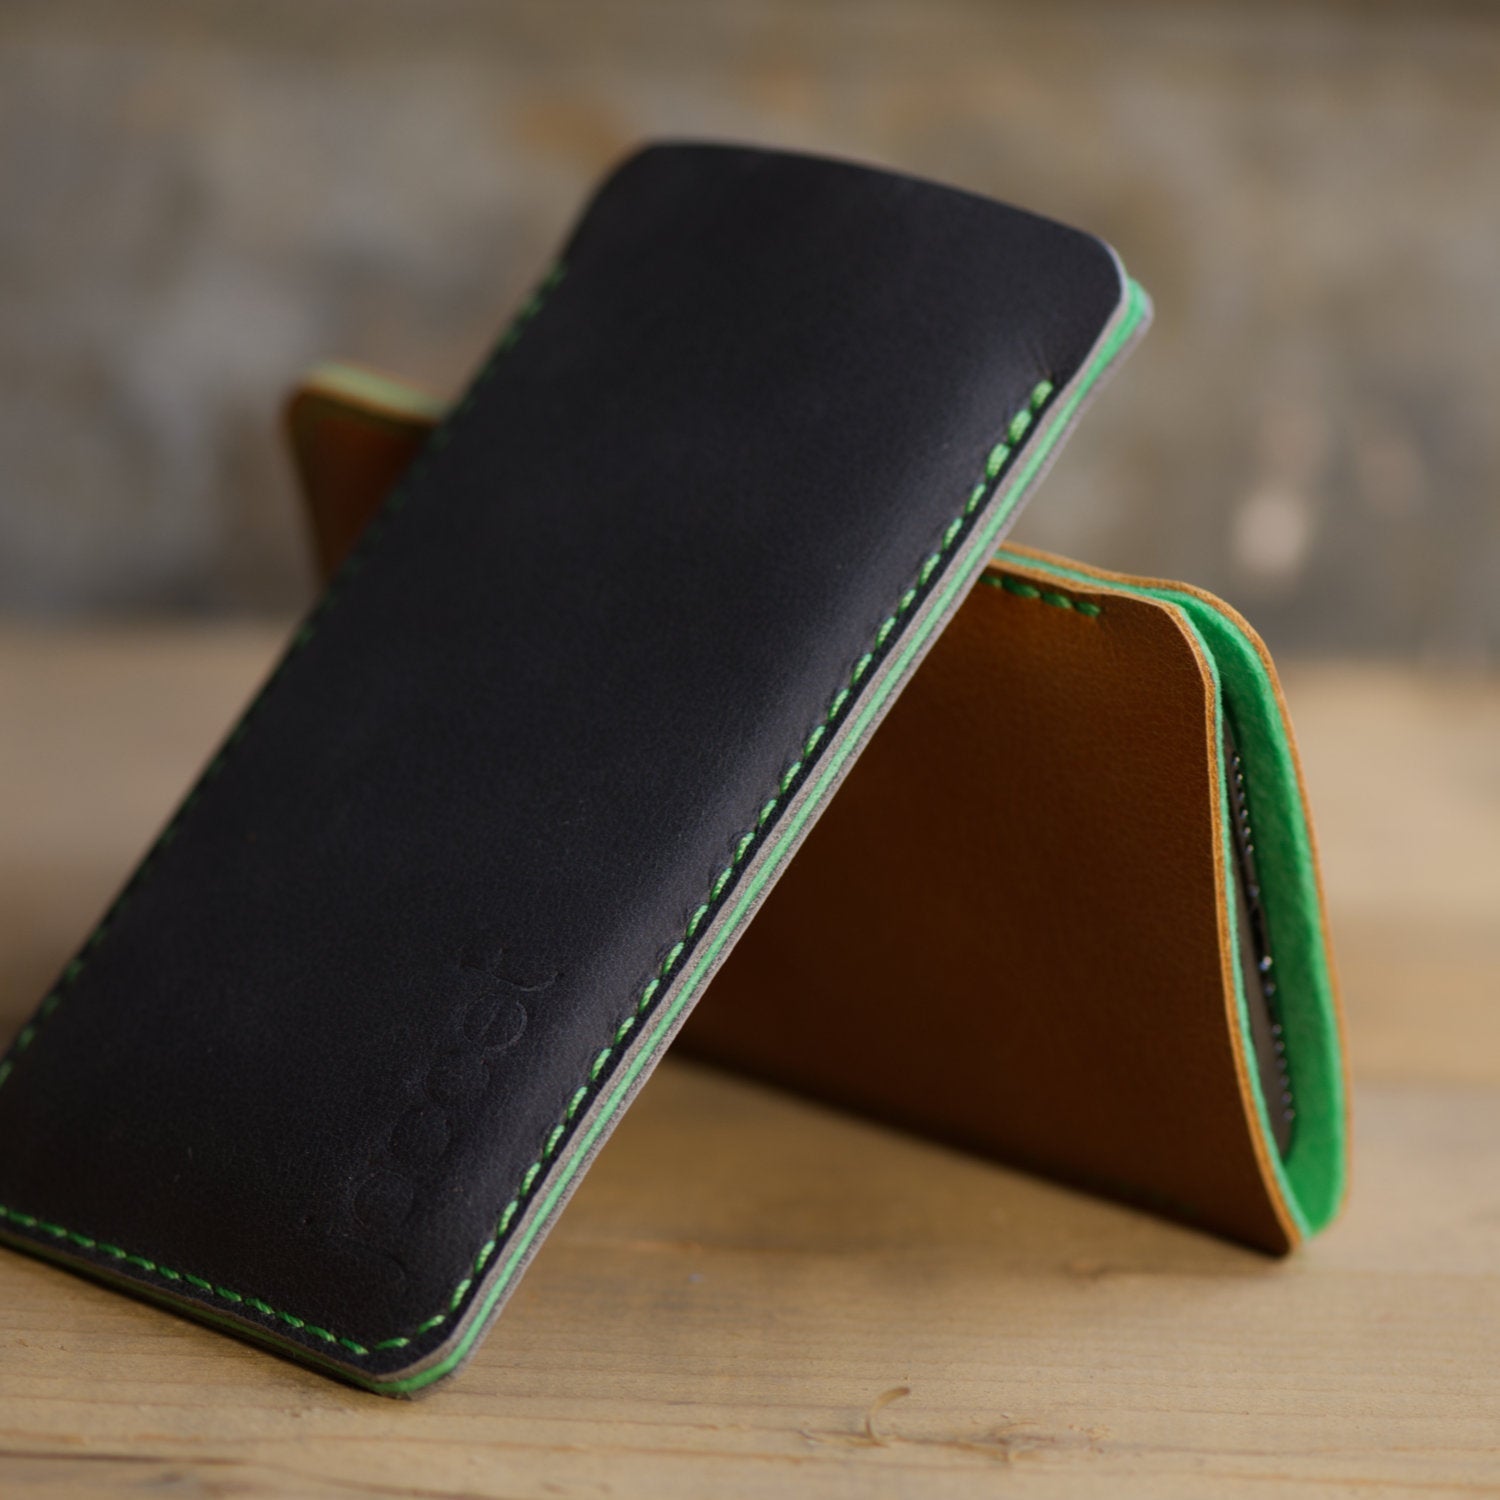 JACCET leather Google Pixel sleeve - anthracite/black leather with green wool felt. 100% Handmade